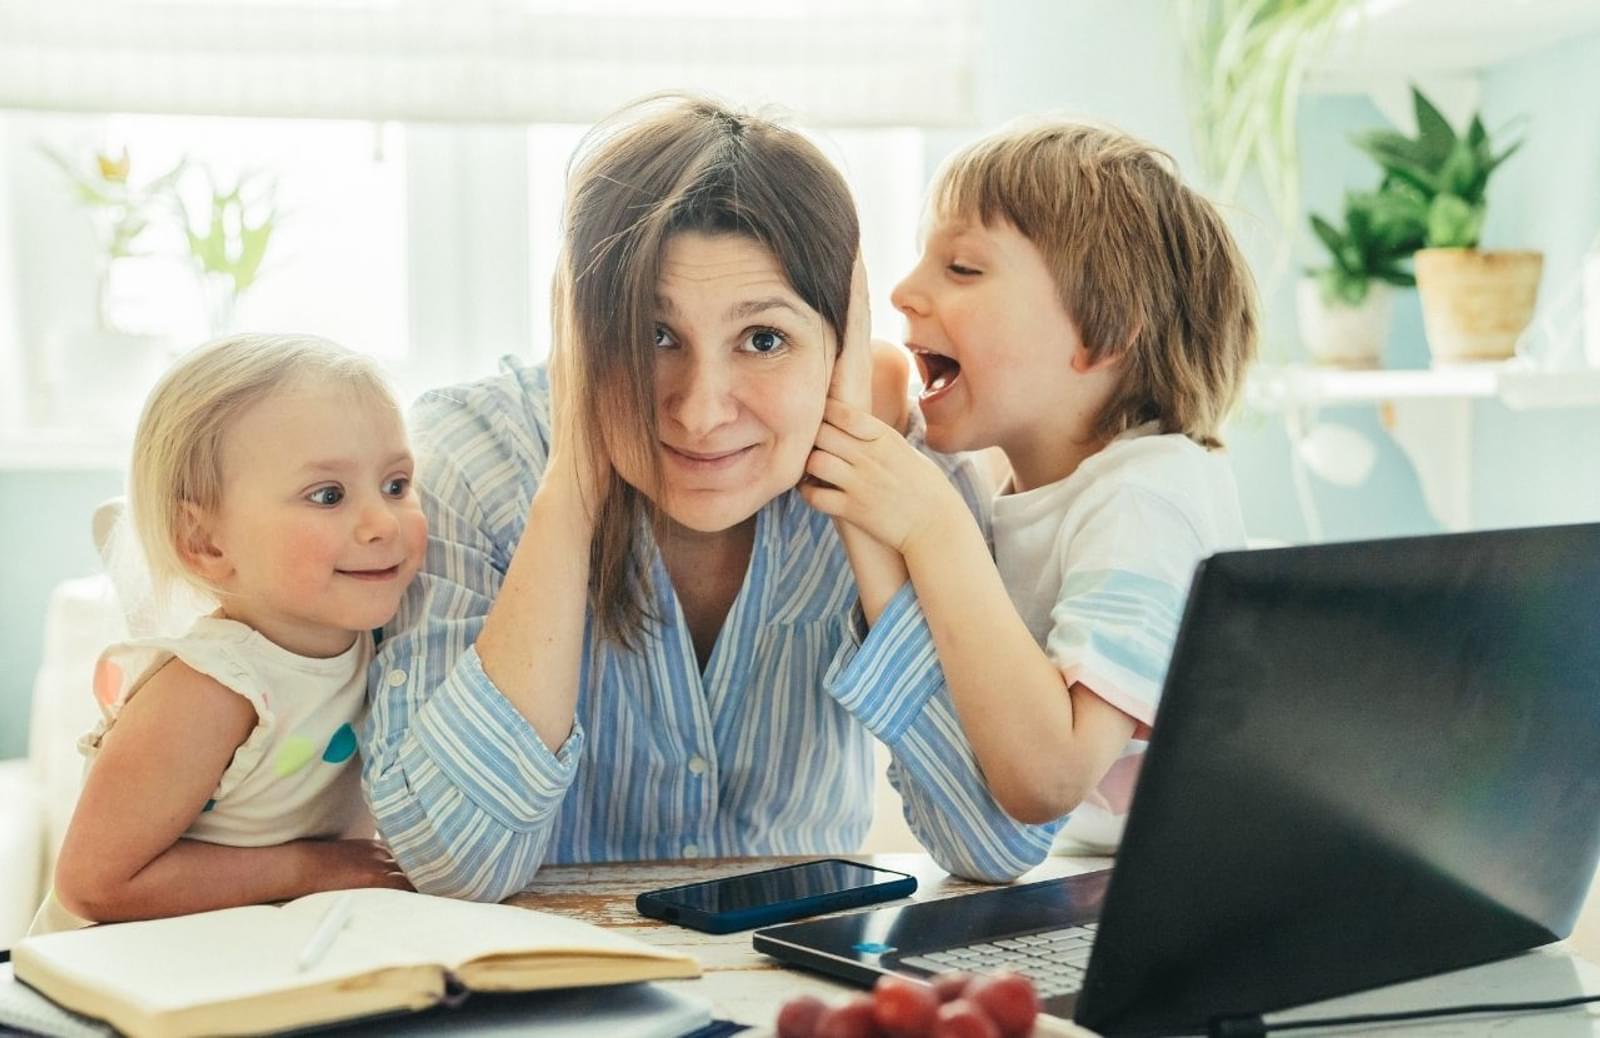 Woman at desk with hands over her ears while young children talk to her